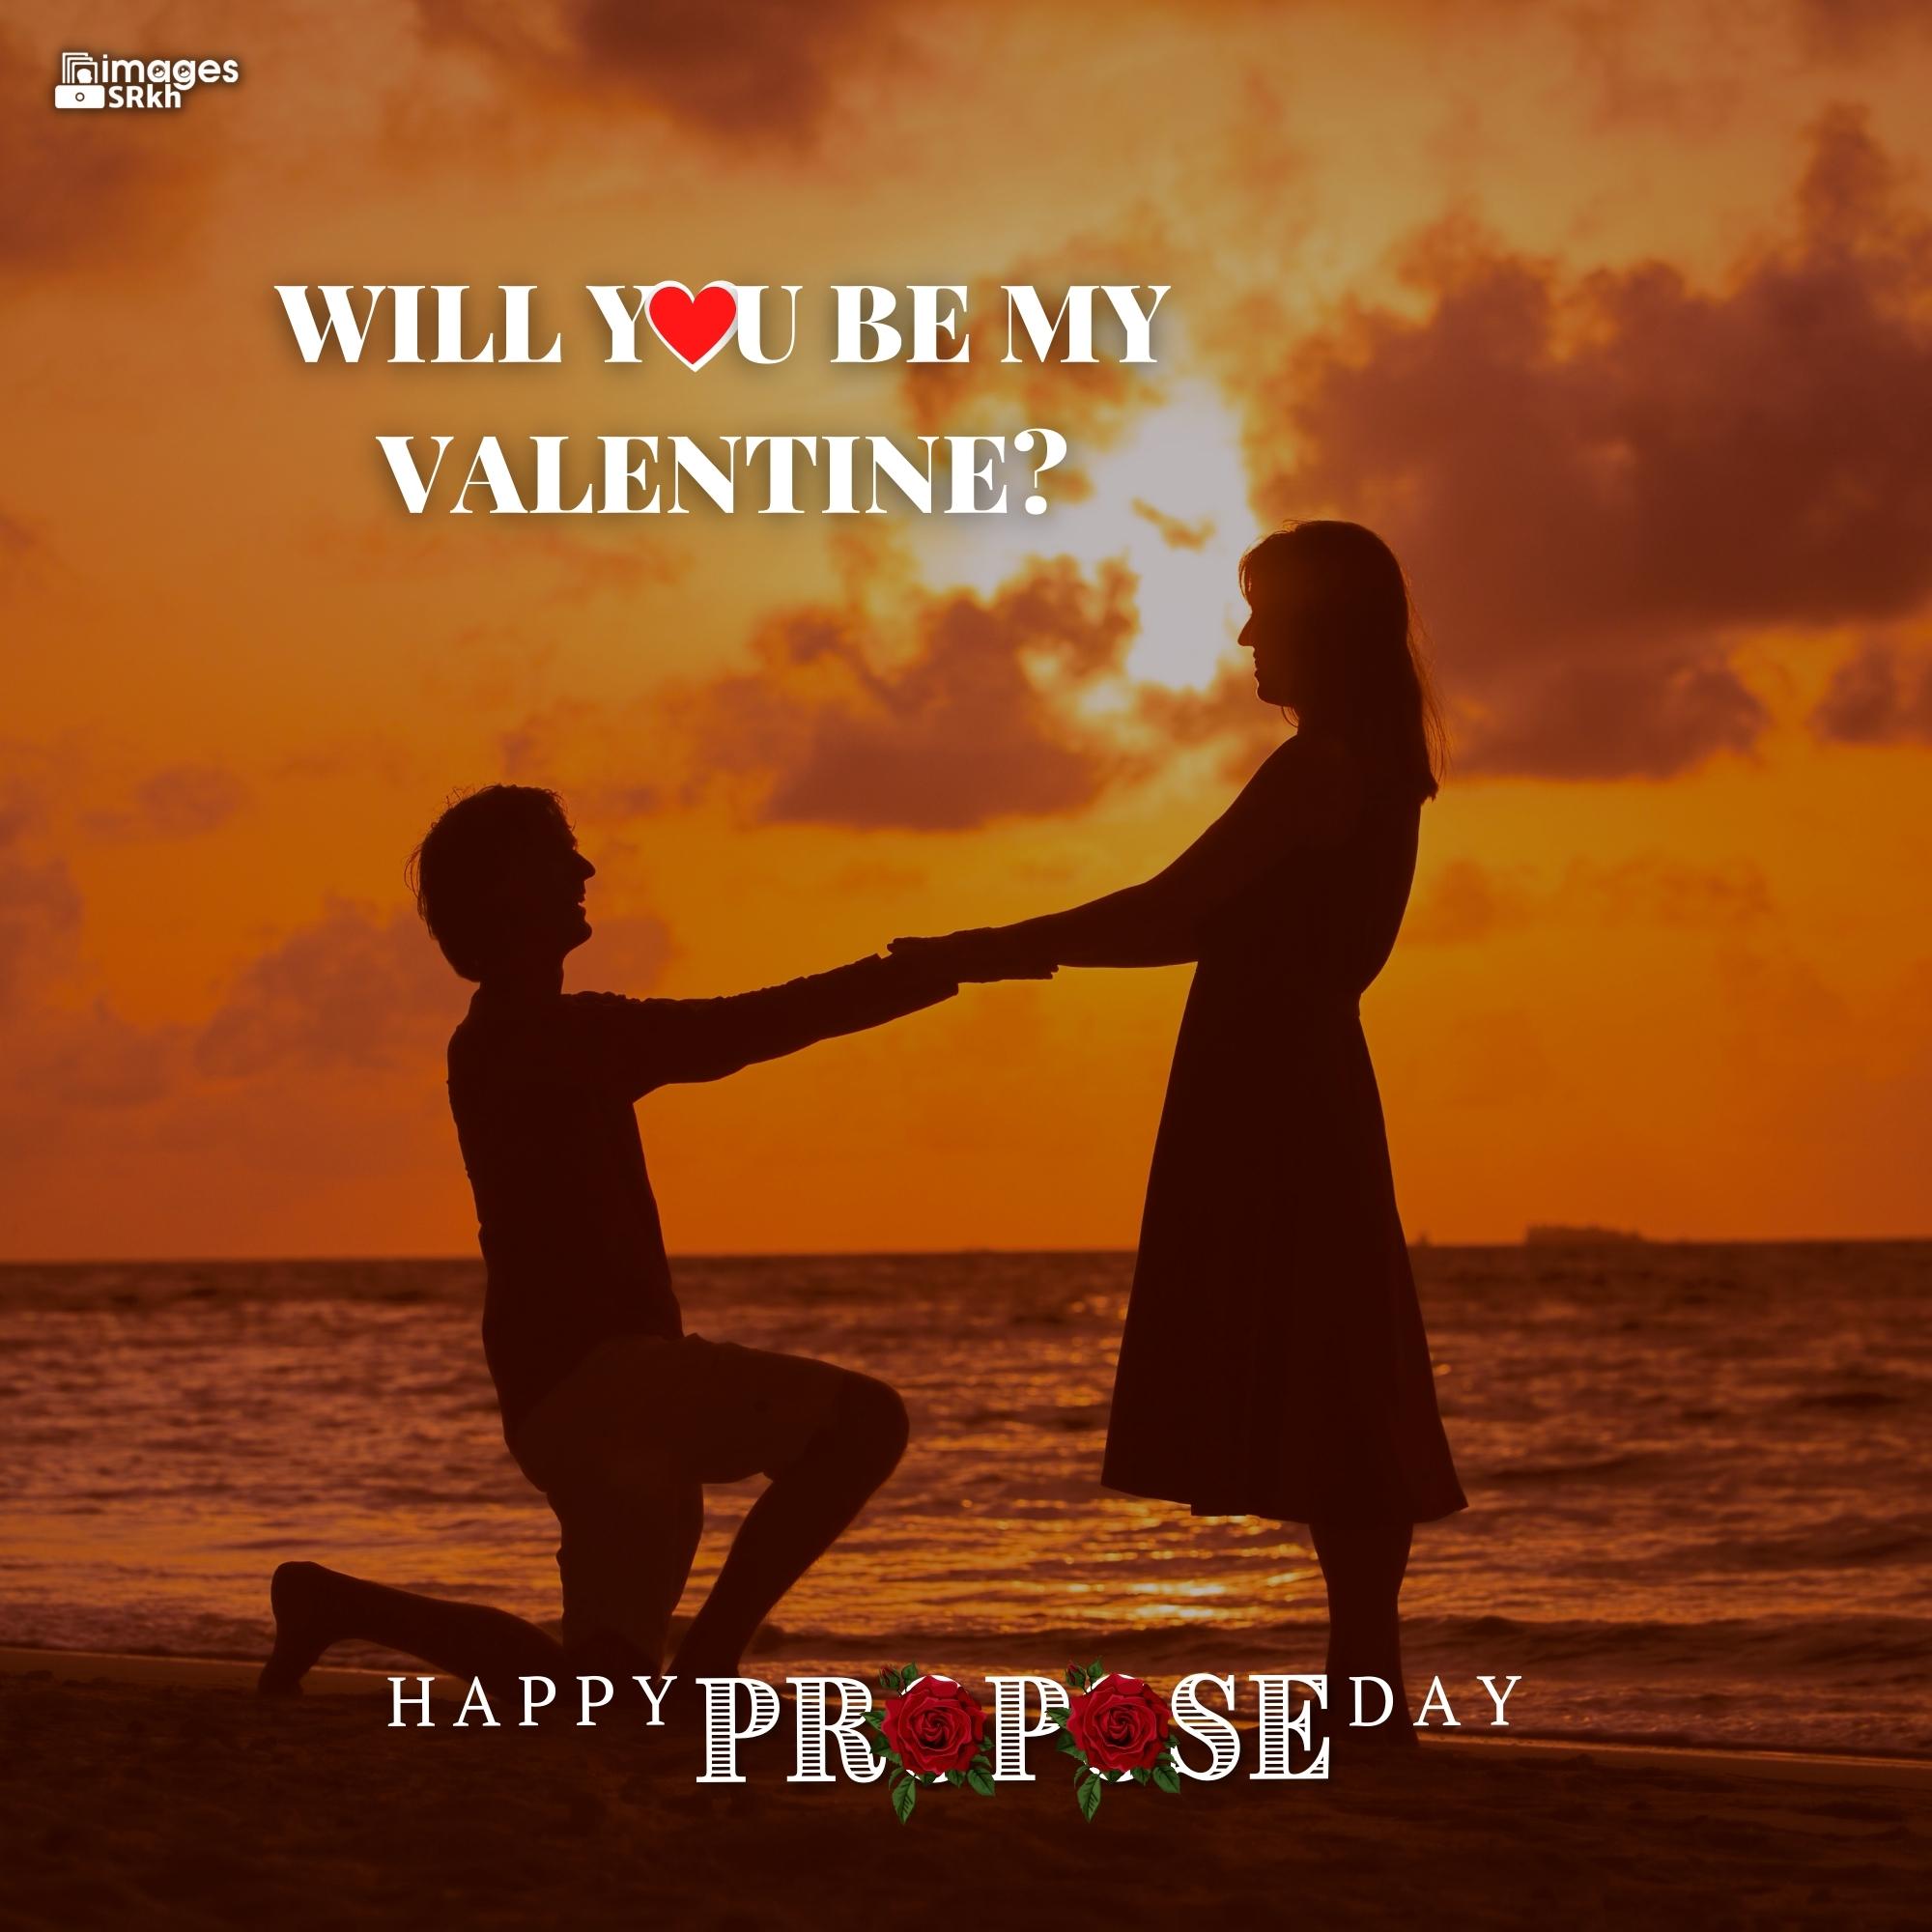 Propose Day Images | 233 | Will You Be My Valentine